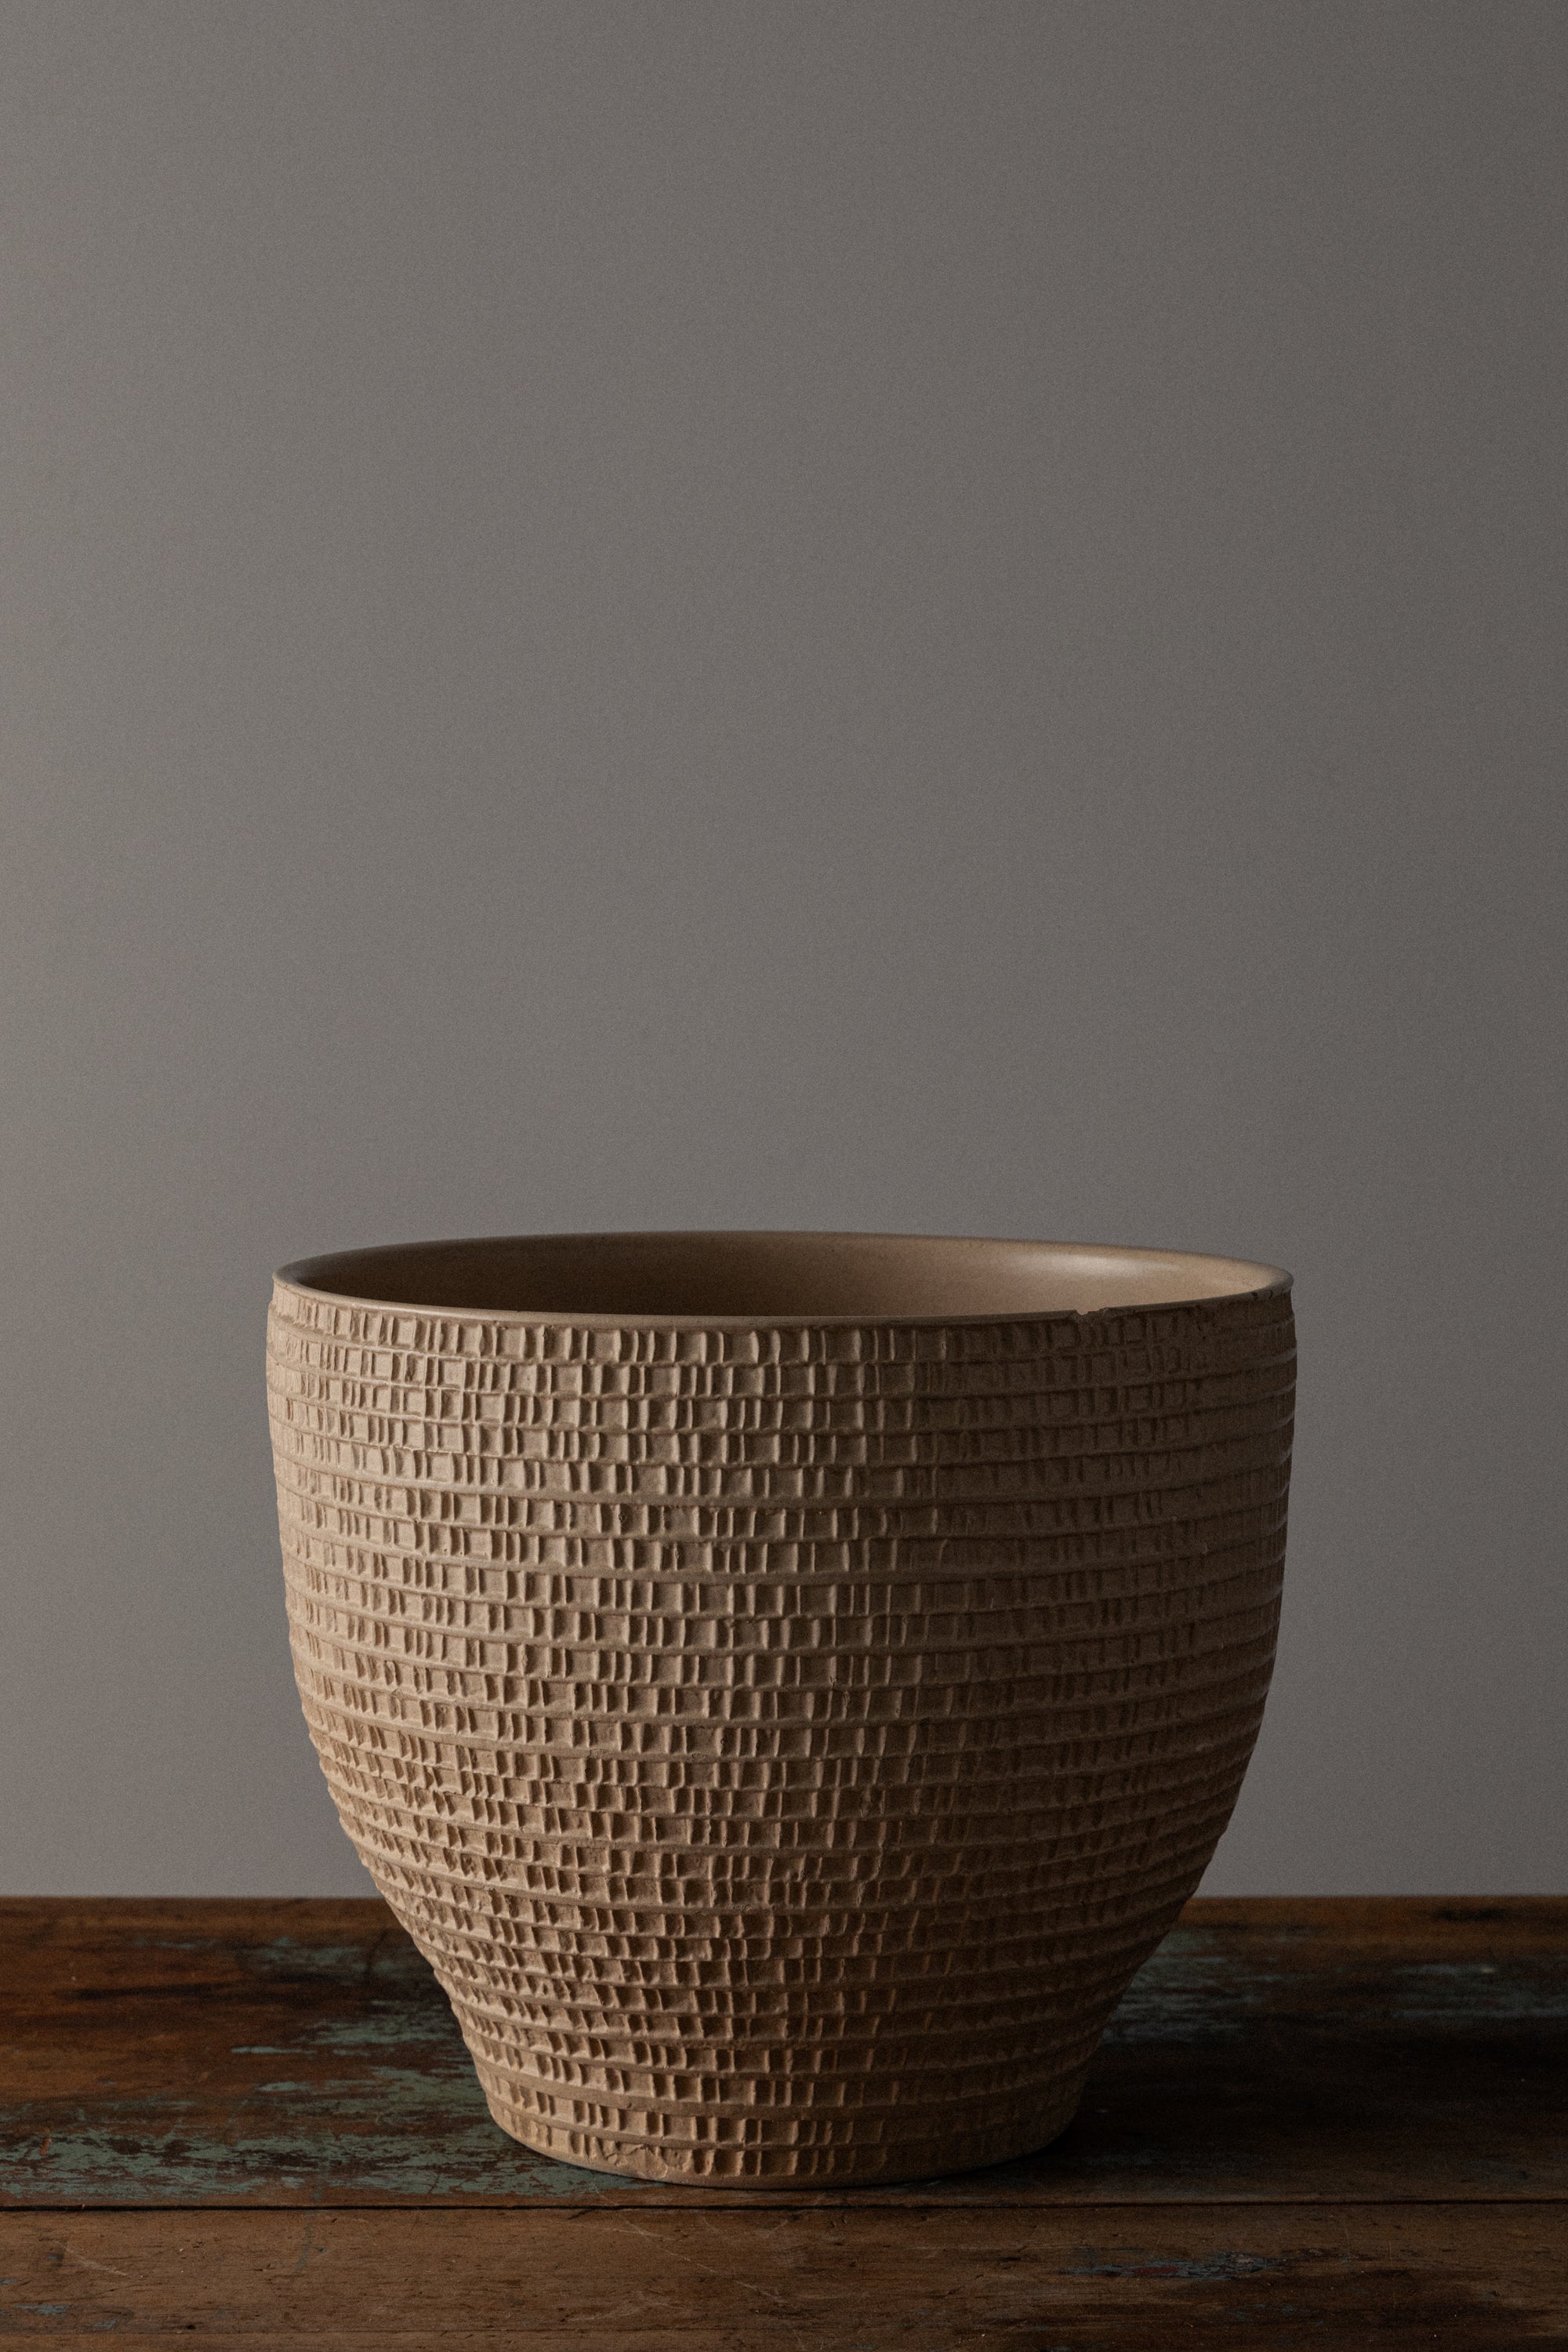 Model 5015 "Rectangle" Planter by David Cressey